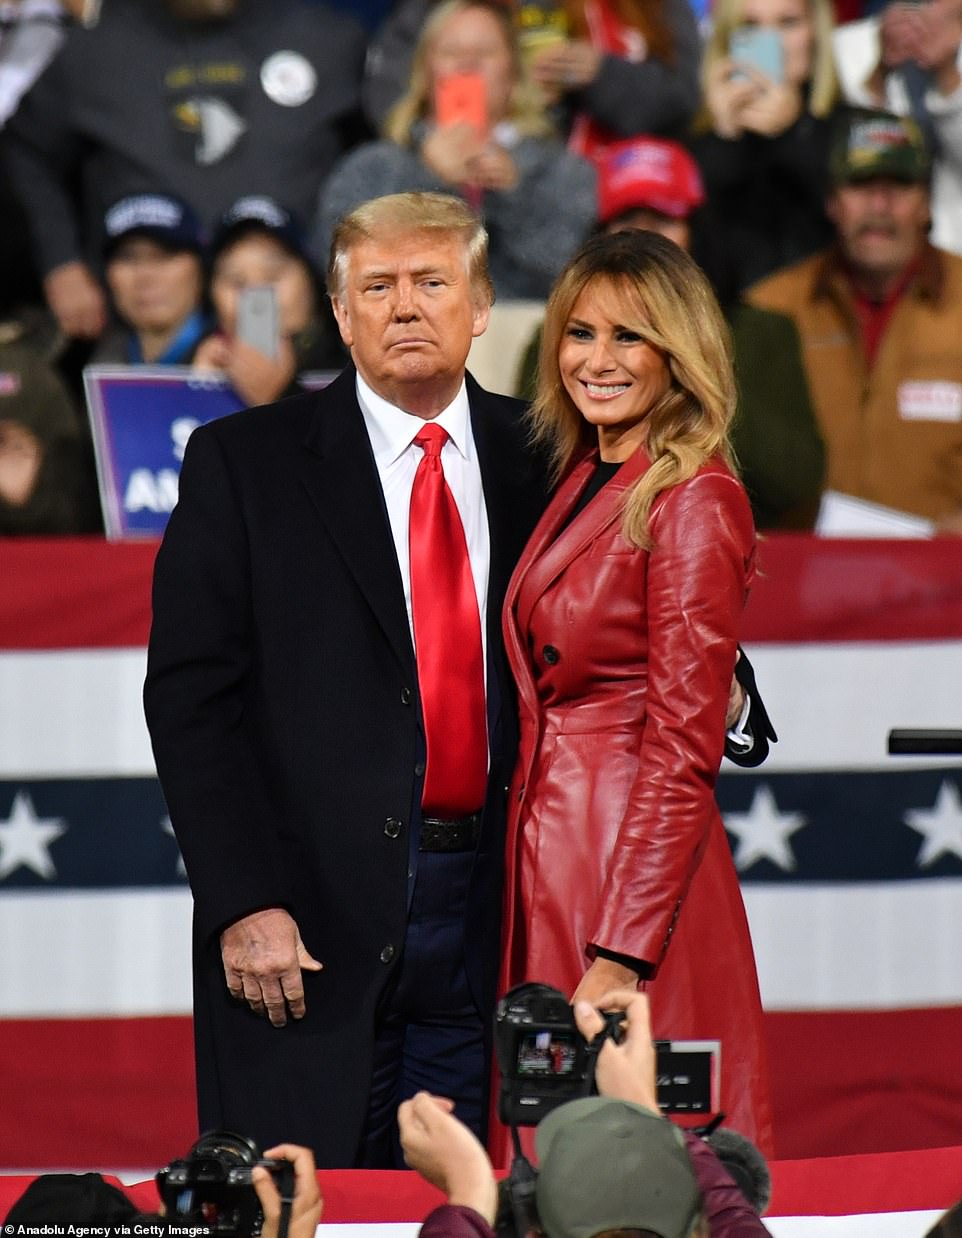 Melania Trump, 50, looked sensational in a $6,200 red leather Alexander McQueen coat as she joined the President at a campaign rally in Georgia last night